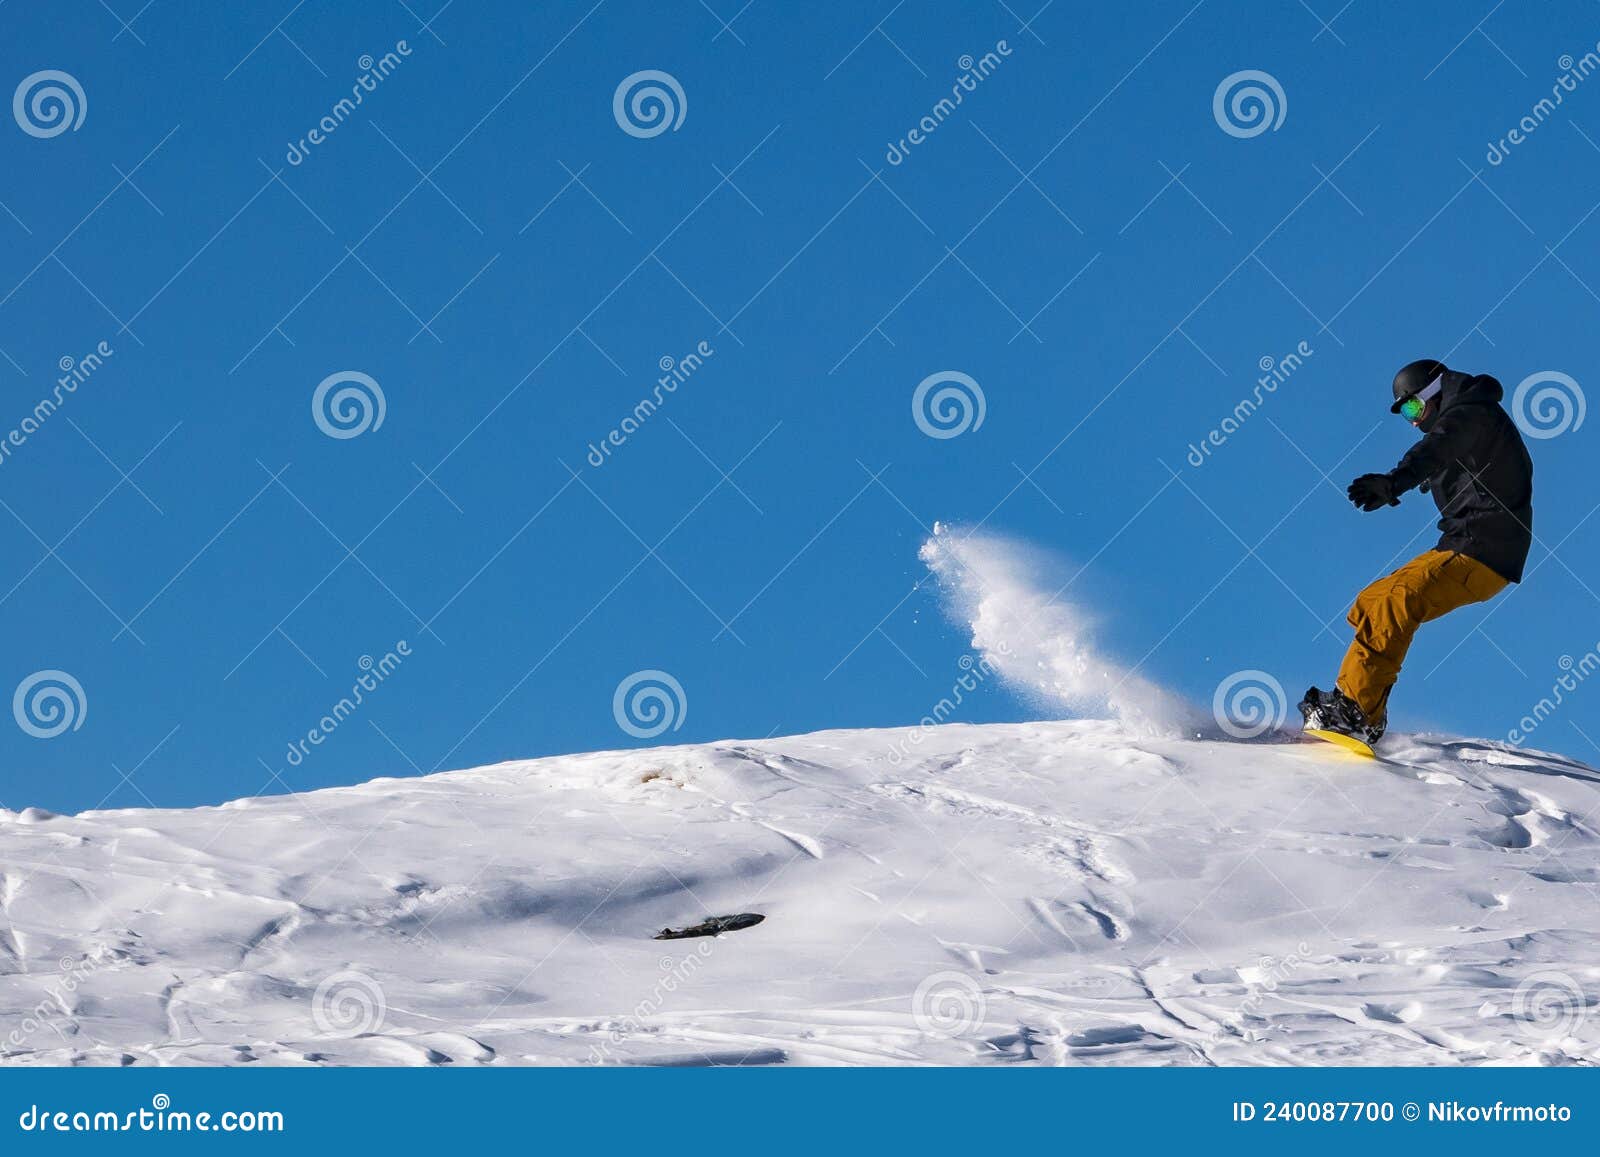 Close-up of a Snowboarder on a Slope Stock Photo - Image of clean ...